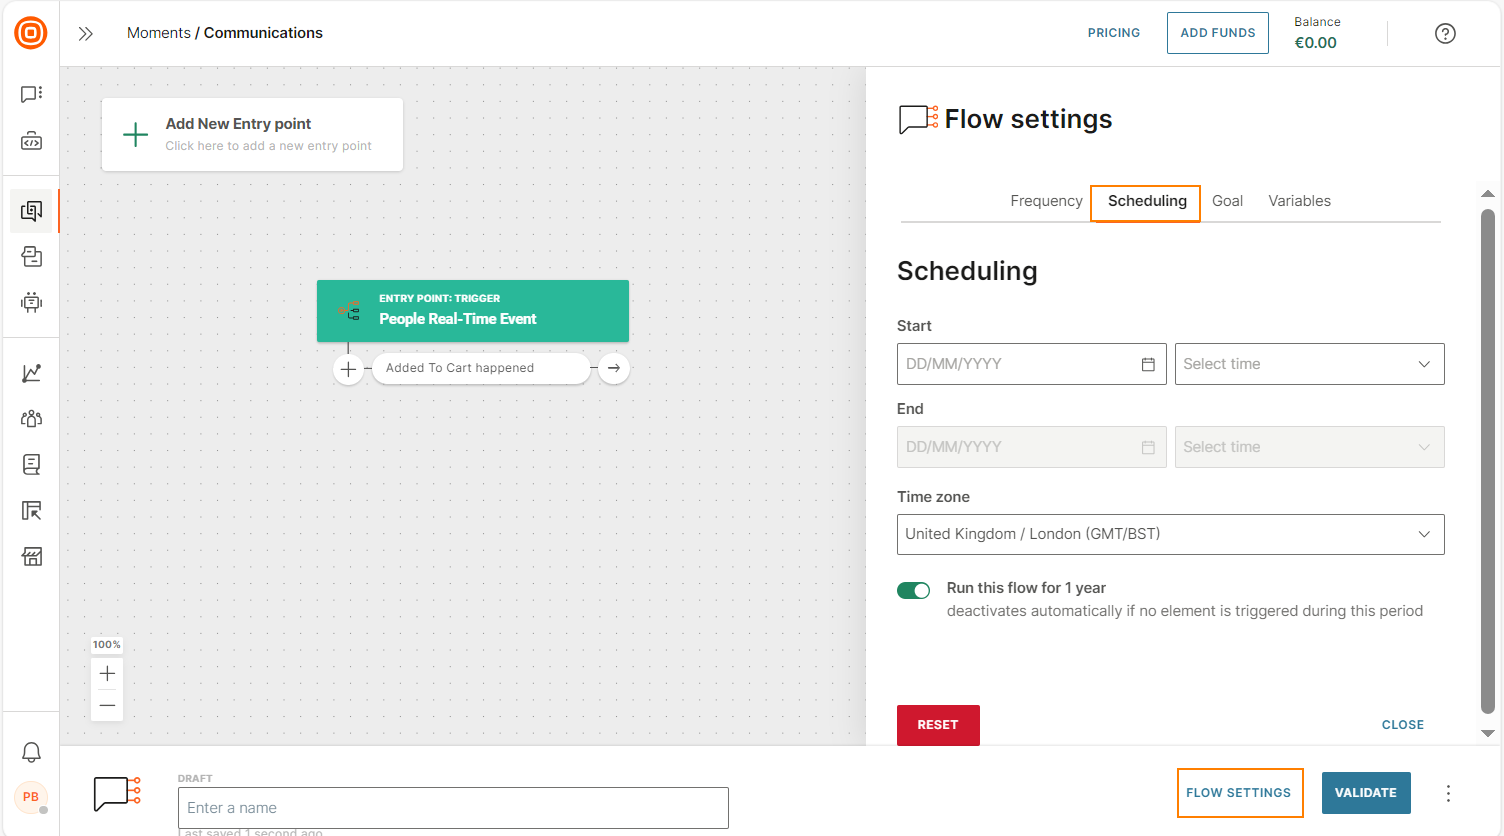 Scheduling settings for the flow